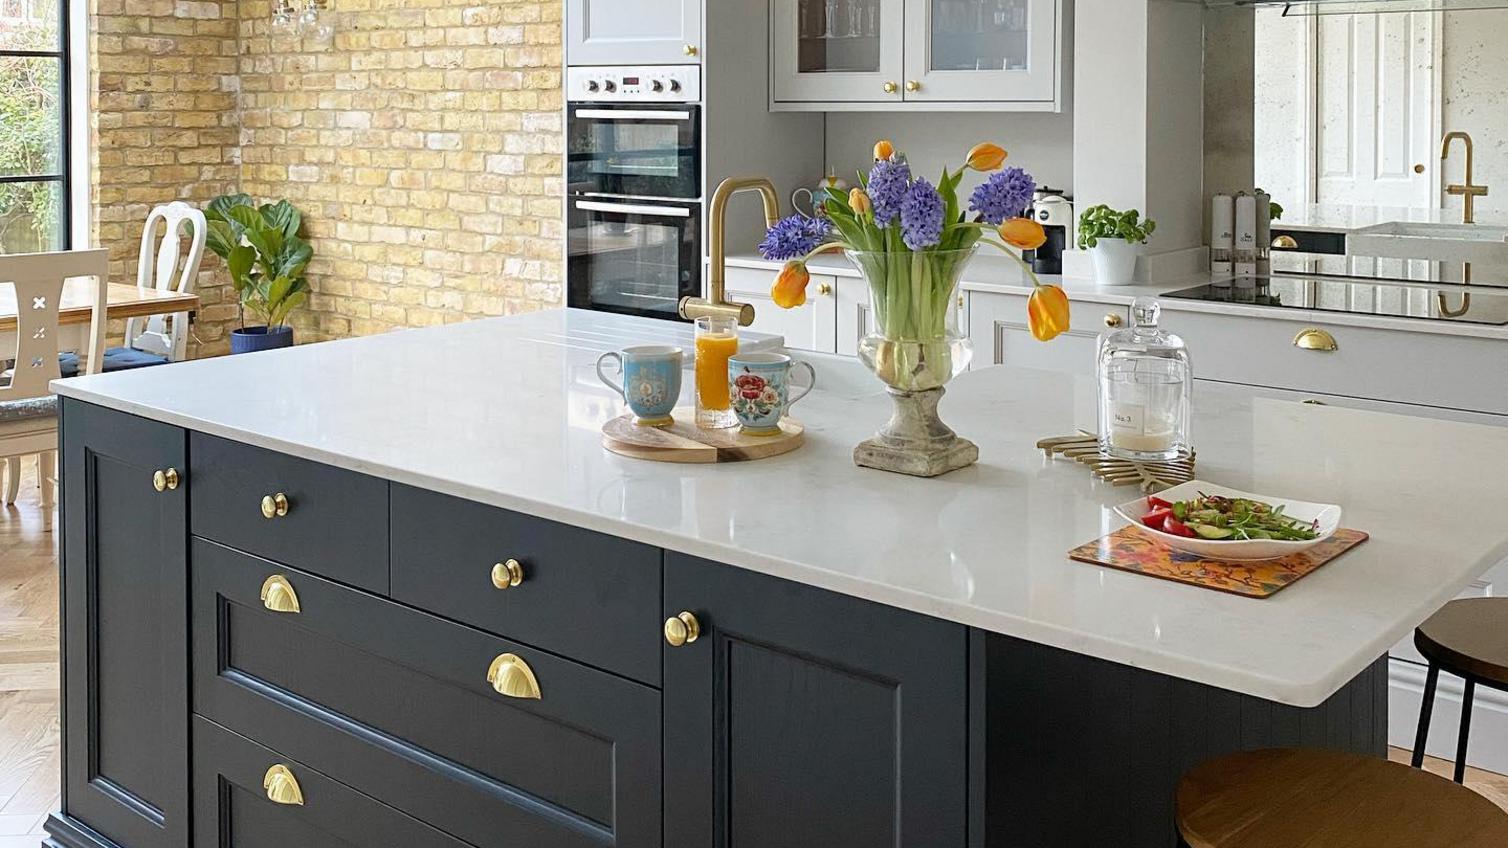 Two-tone kitchen idea with a navy island, dove-grey wall units gold cup handles, a white worktop, and decorative objects.